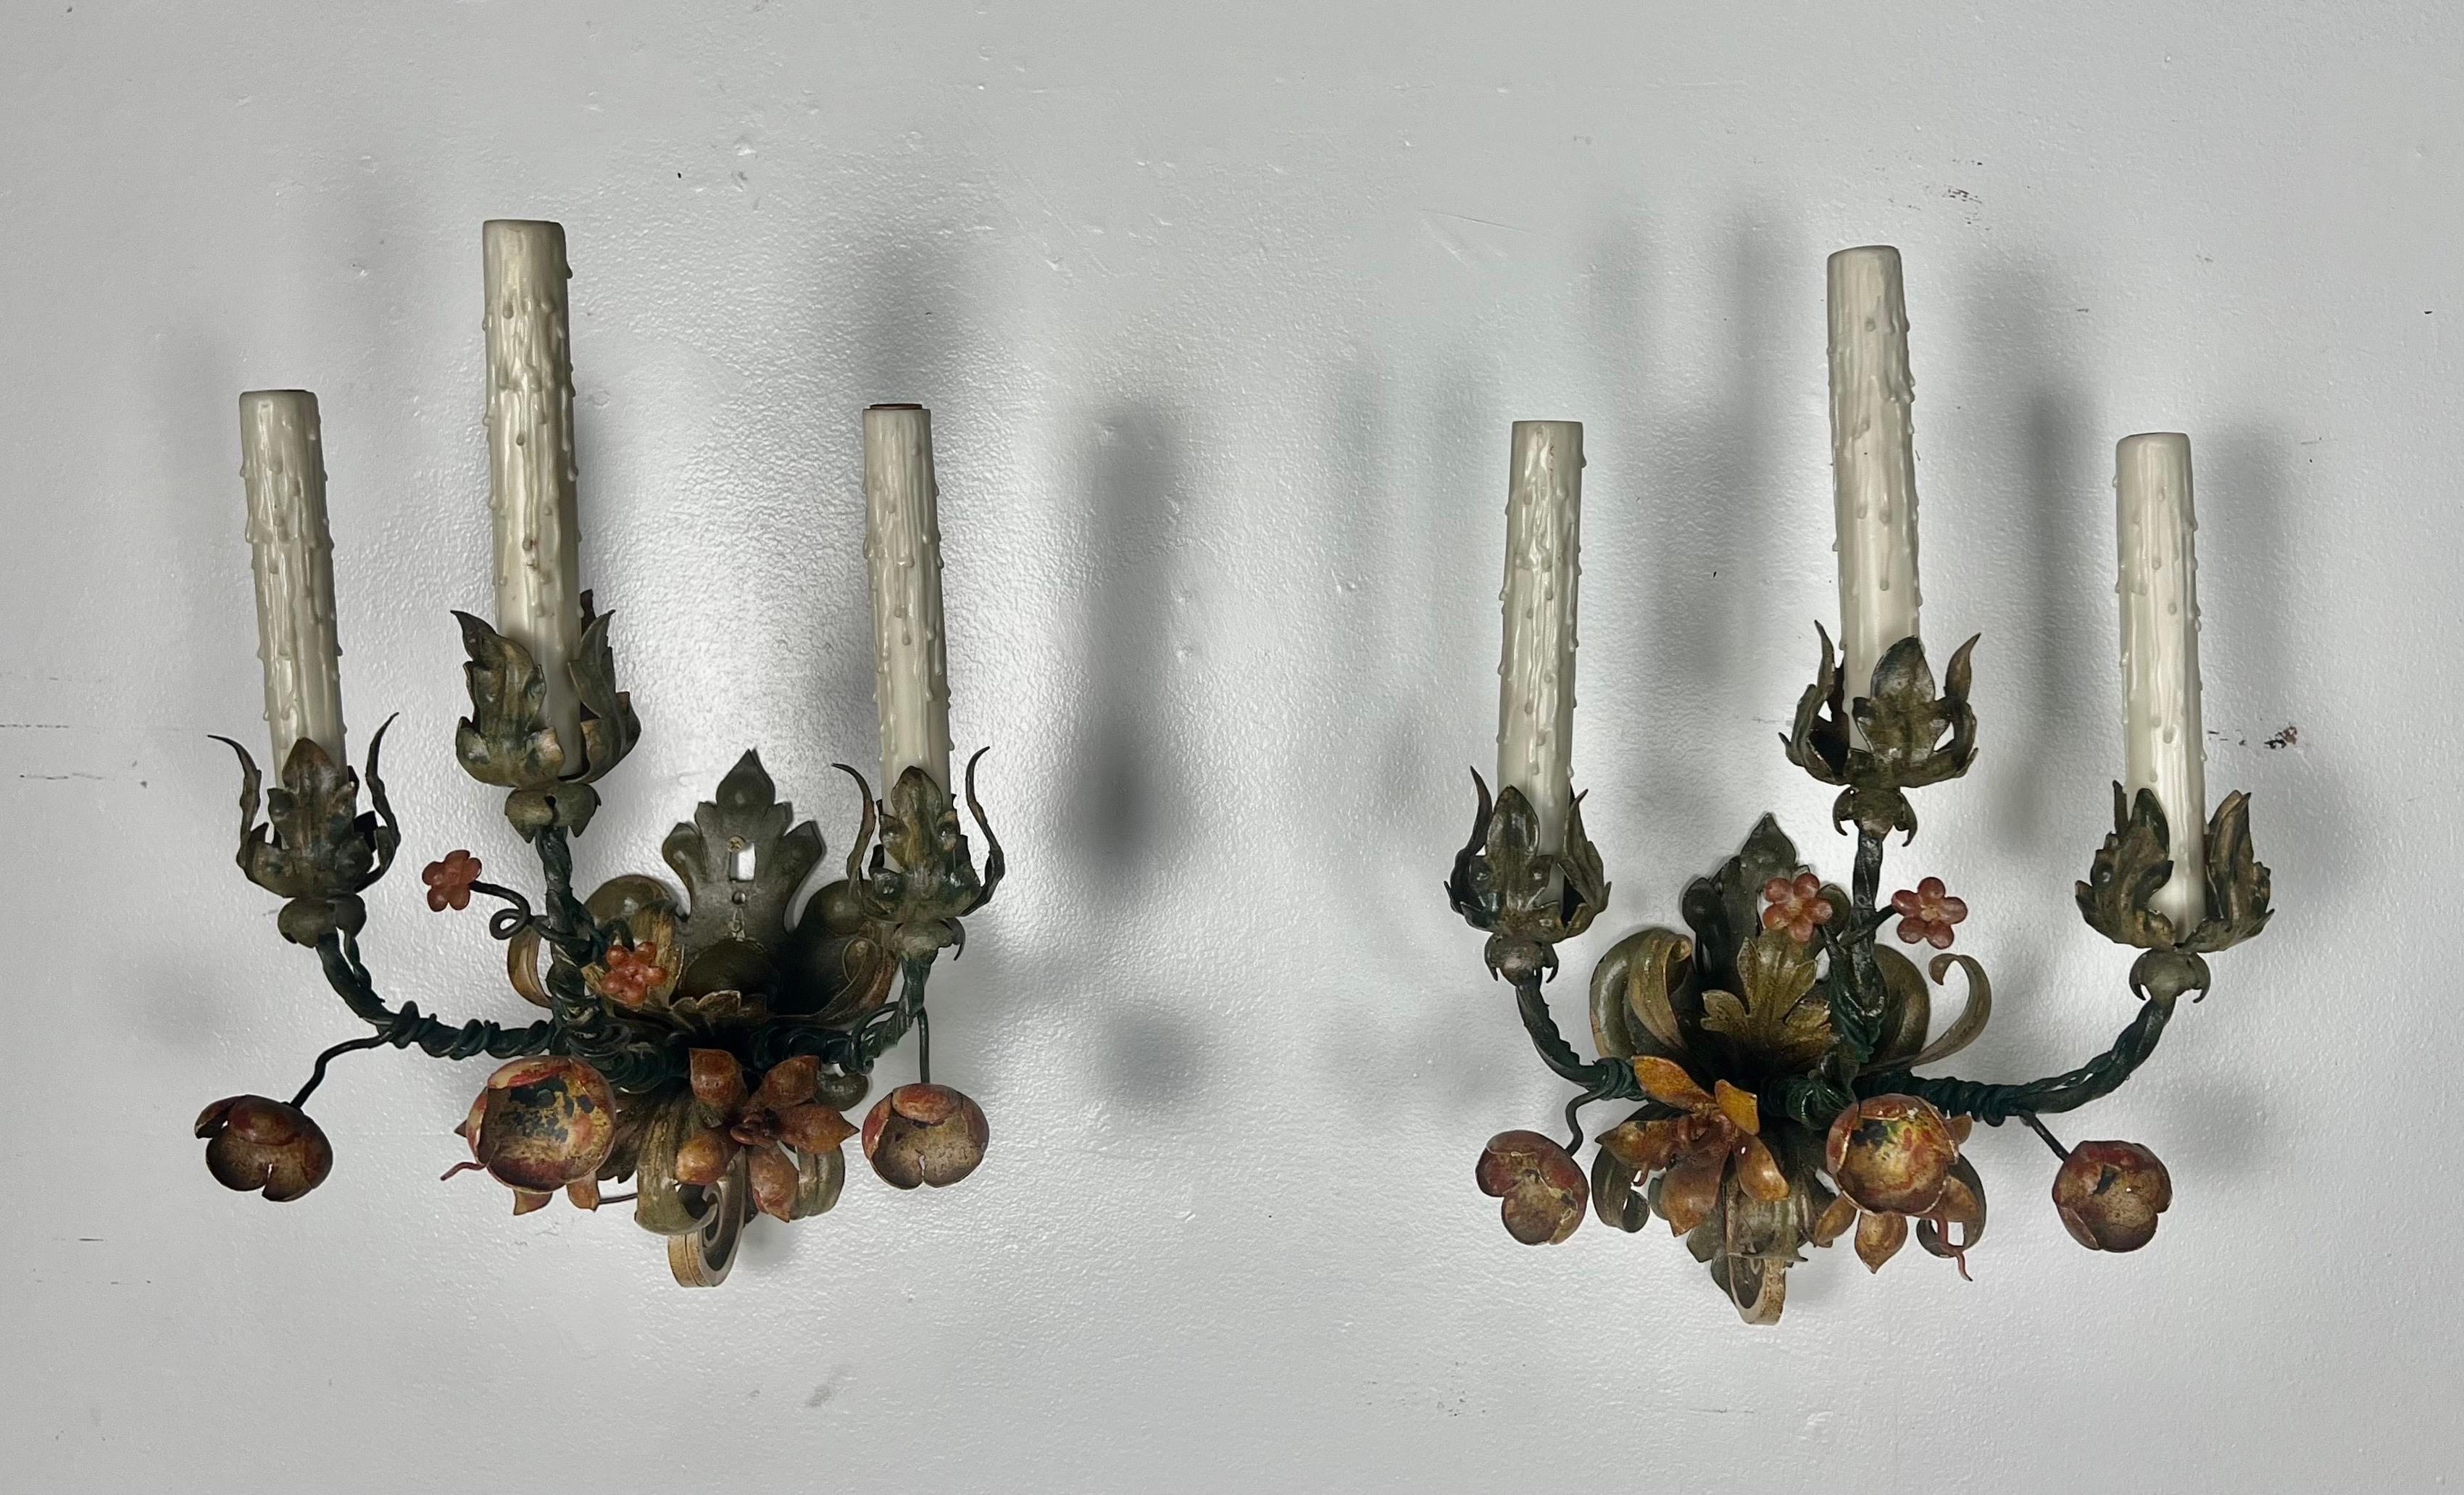 Pair of French 3-light wrought iron and painted sconces.  The sconces are adorned with flowers painted in shades of green and terra cotta.  The sconces are wired and in working condition.  Beautiful painted finish with bits of gilt metal underneath.